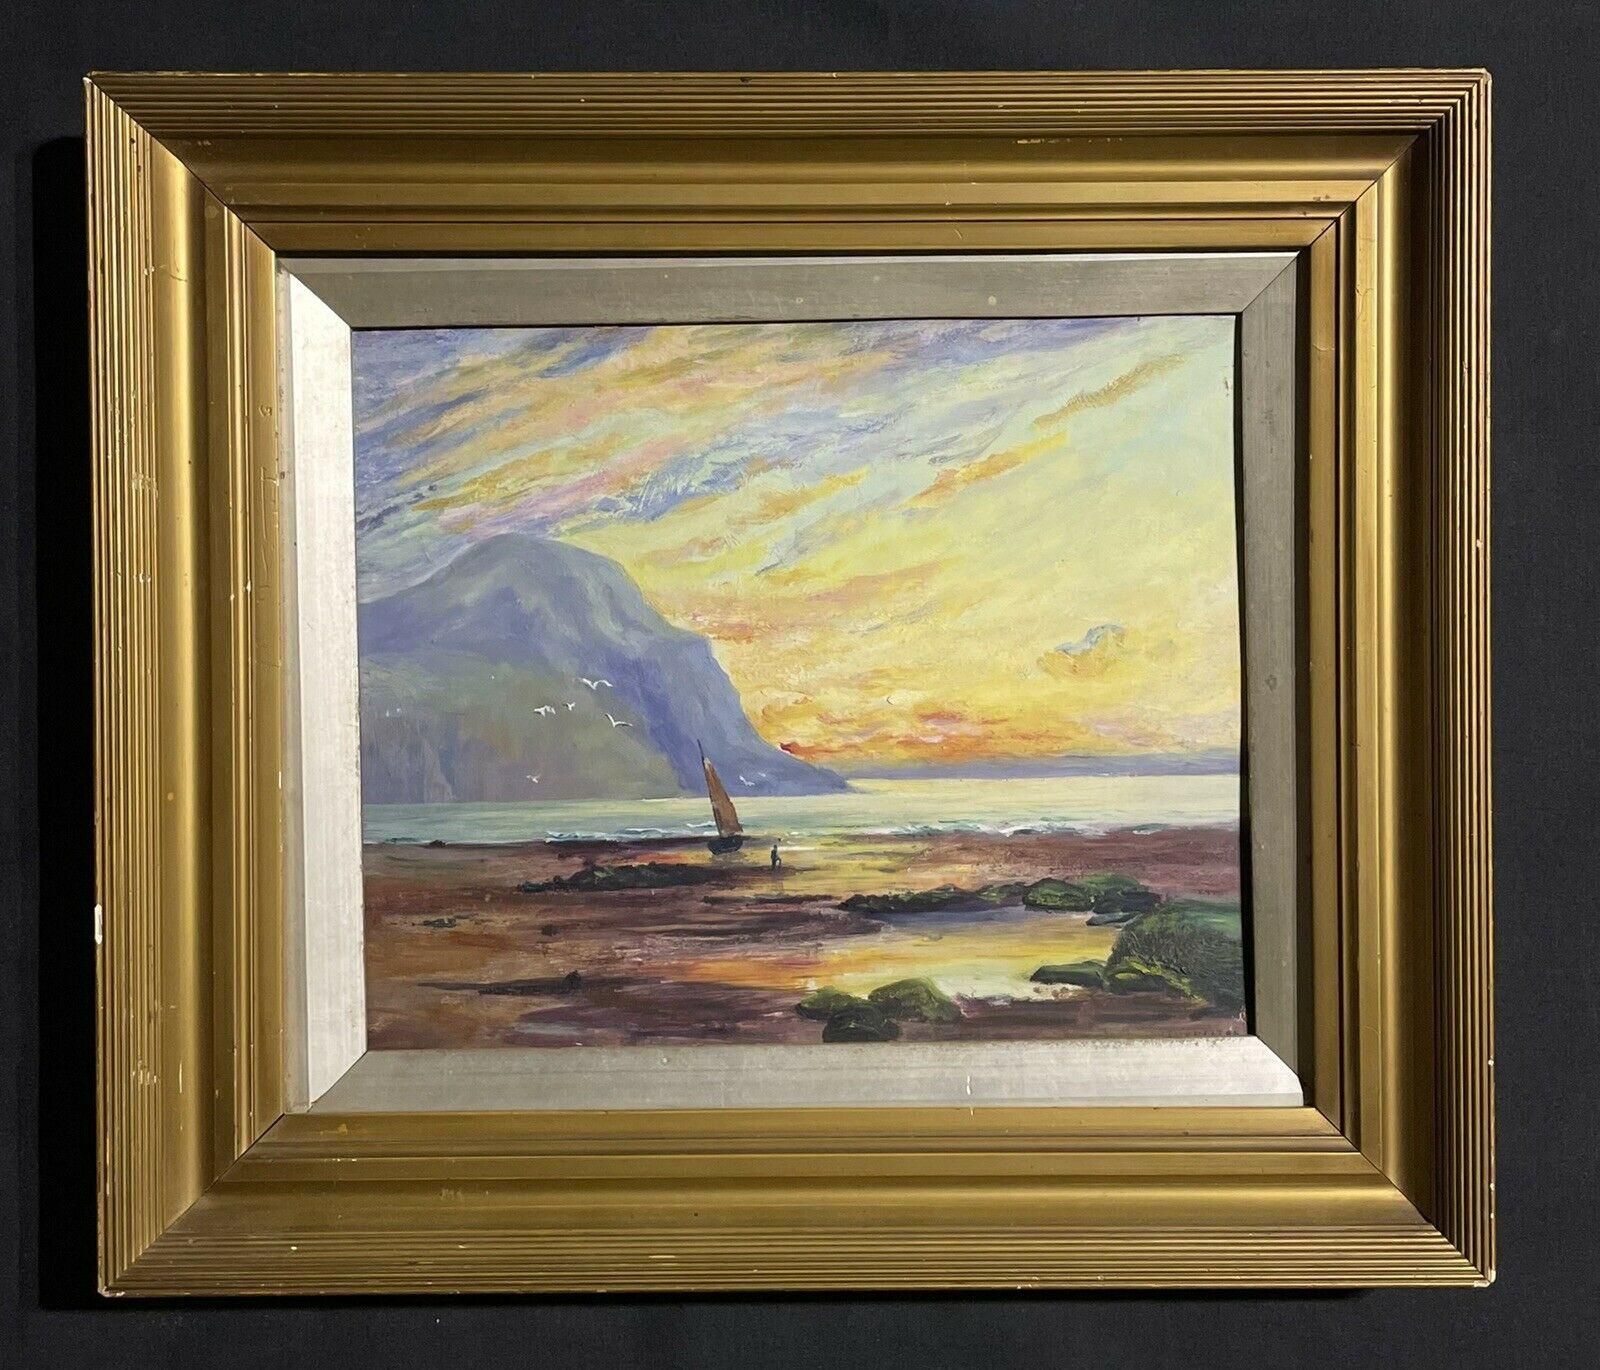 Antique English Marine Oil Painting, dated 1906, Sunset Rocky Coastline - Brown Landscape Painting by English Antique